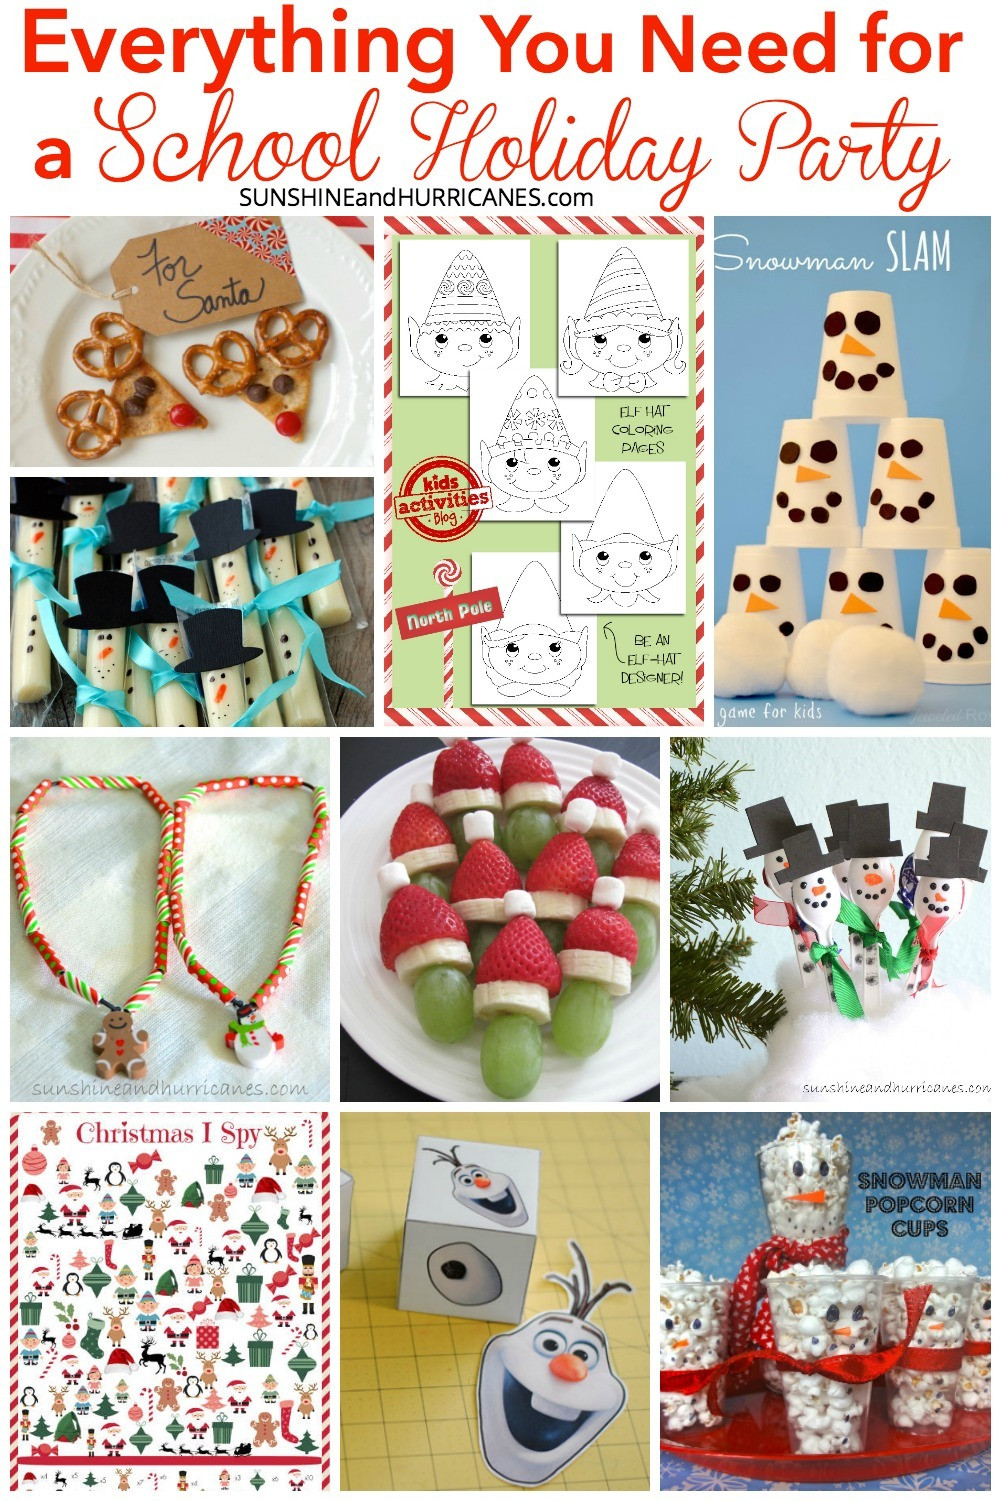 Elementary School Christmas Party Ideas
 Everything You Need To Totally Rock A School Holiday Party